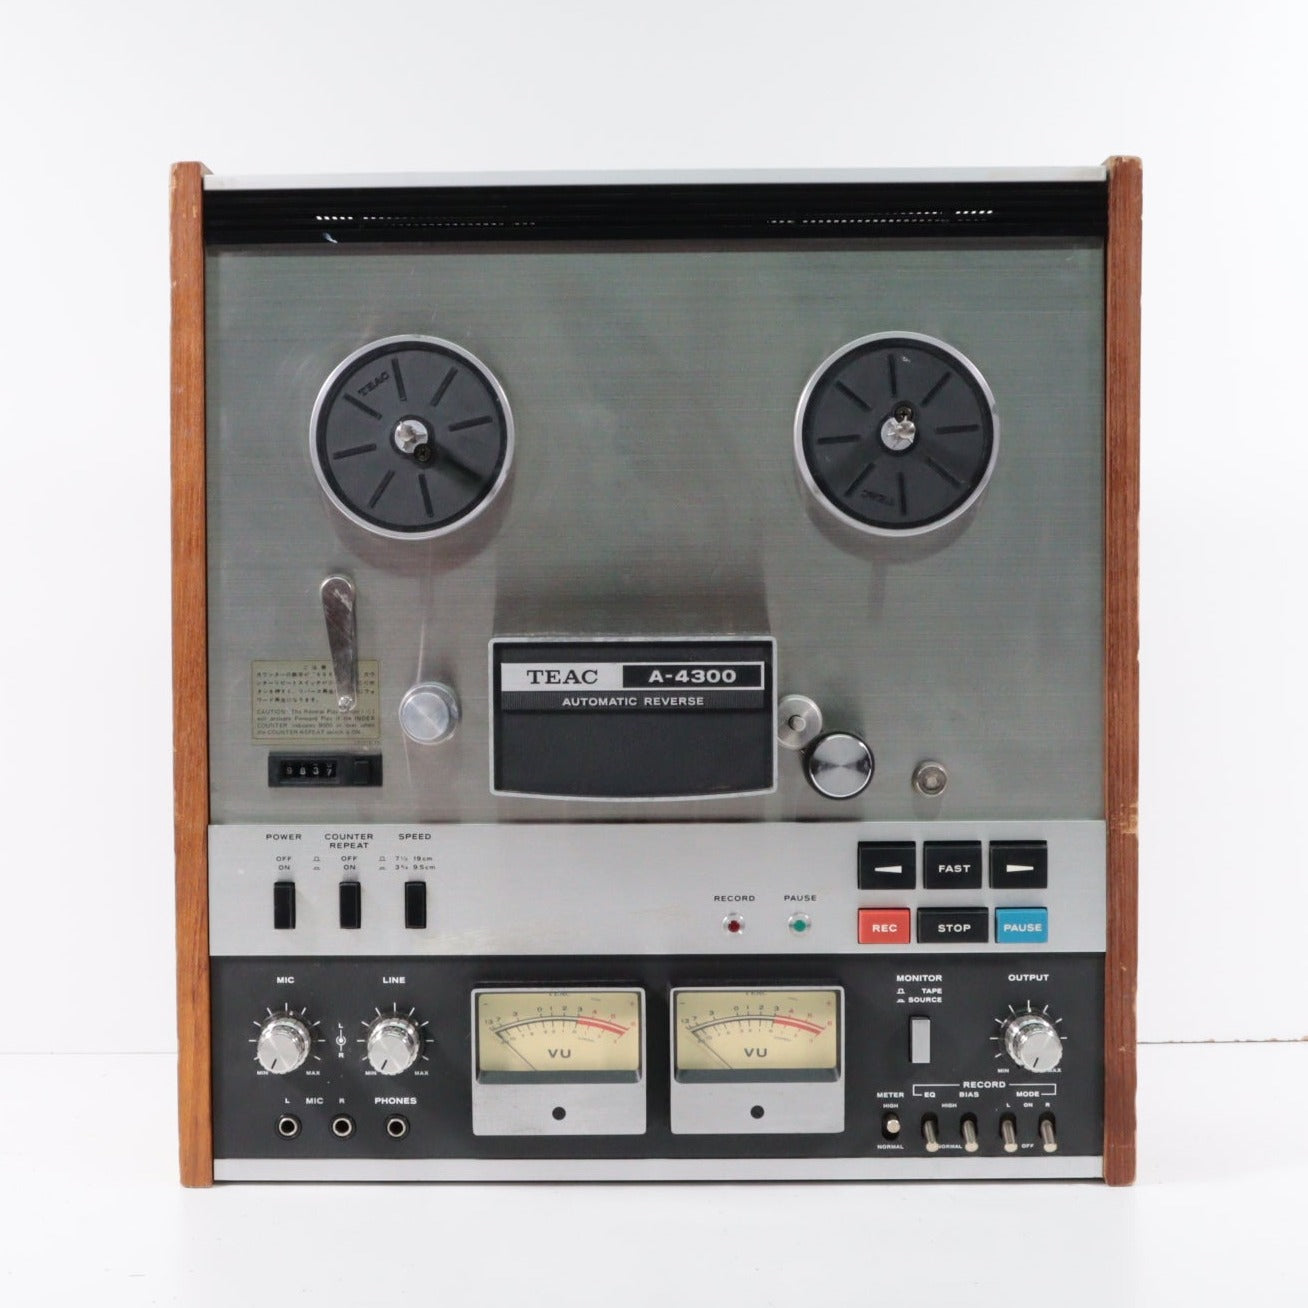 Teac A-4300 Reel-to-Reel Player Recorder with Auto Reverse (MISSING TE